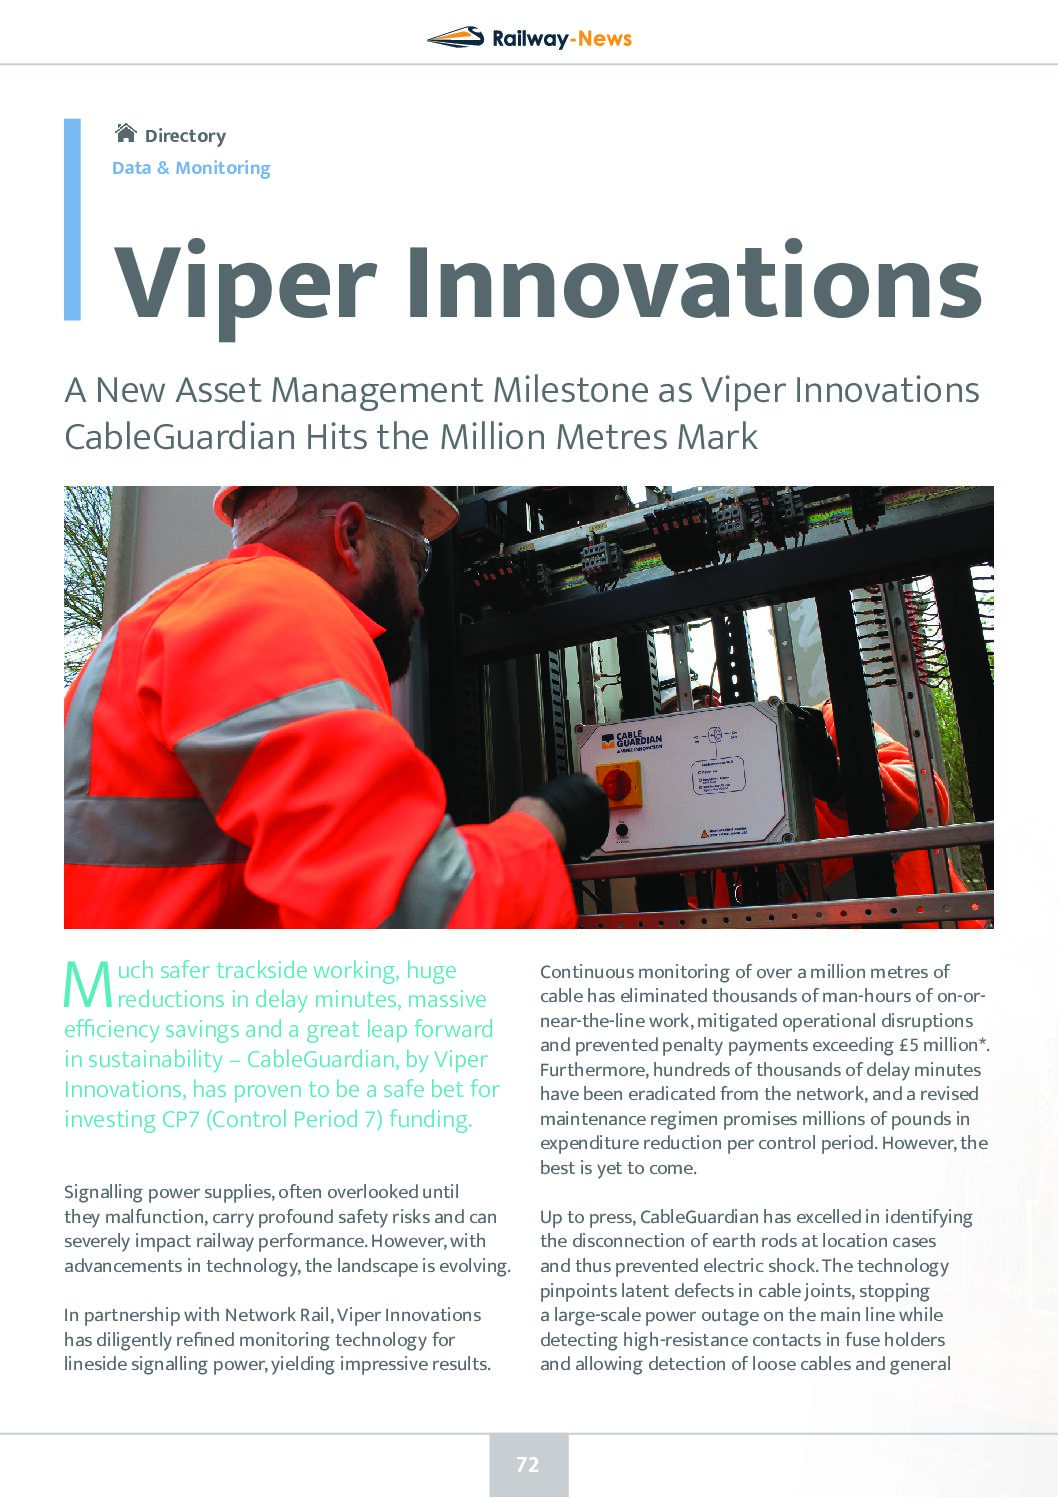 A New Asset Management Milestone as Viper Innovations CableGuardian Hits the Million Metres Mark